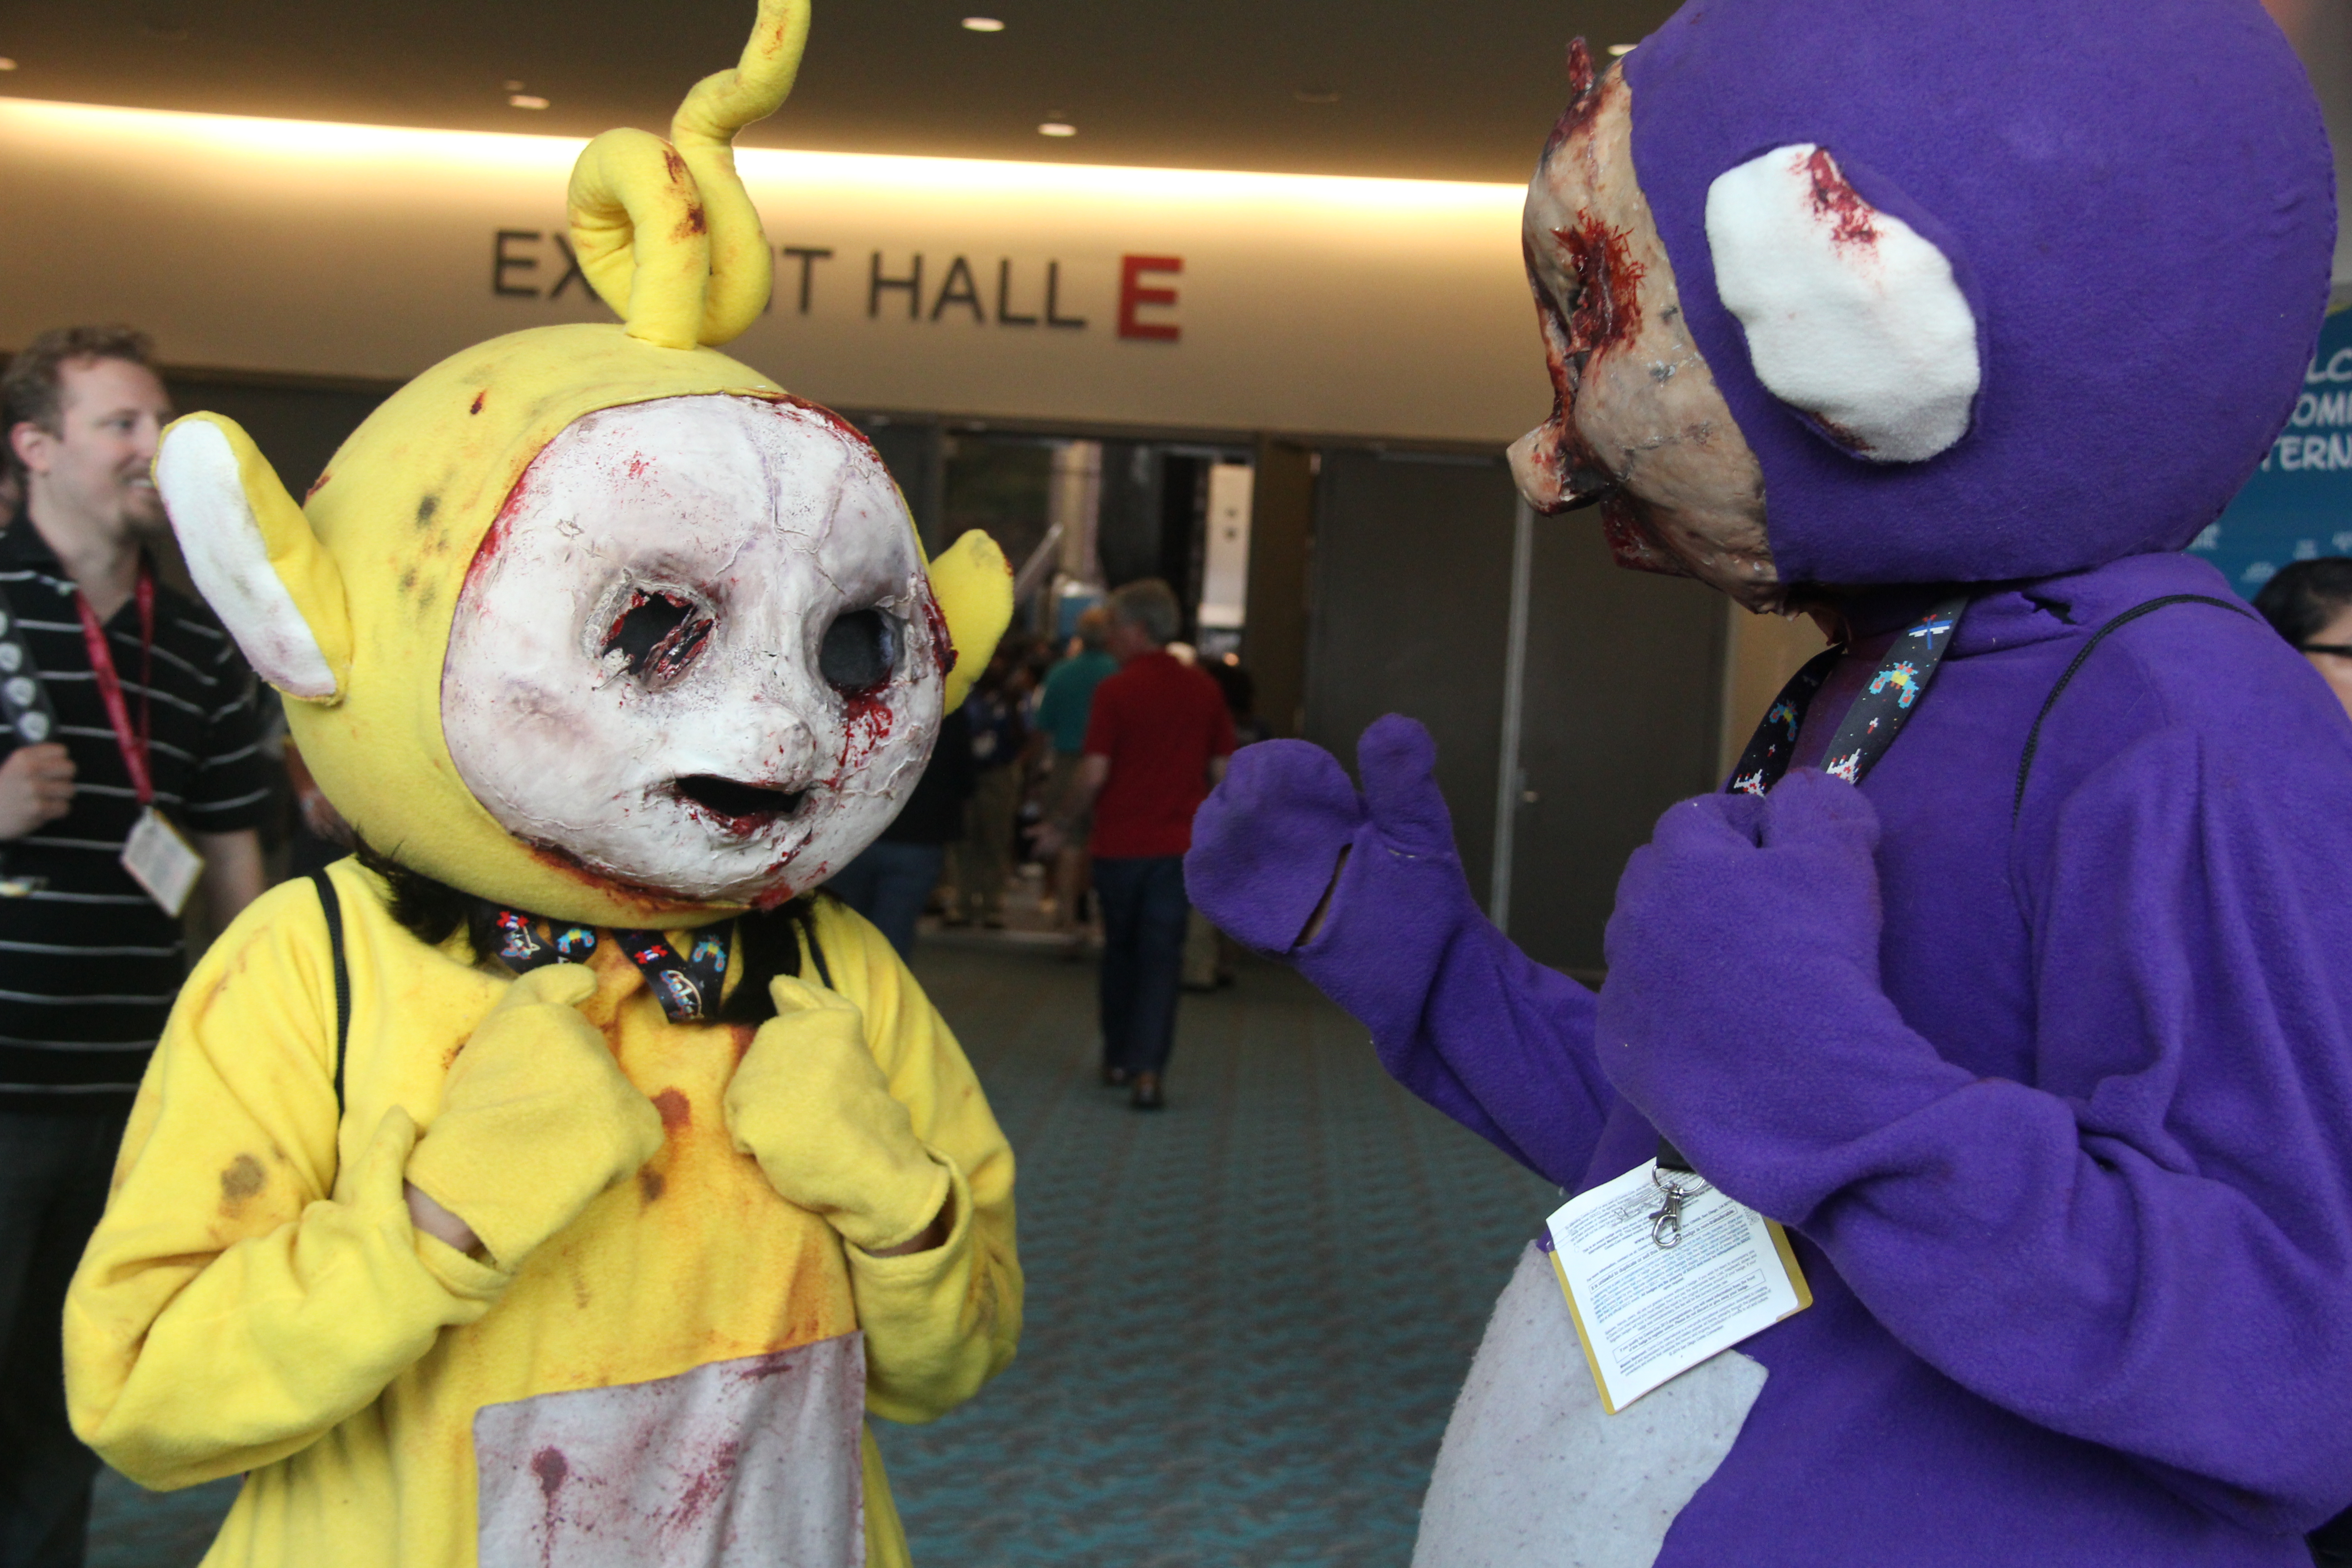 Scary teletubbies costumes